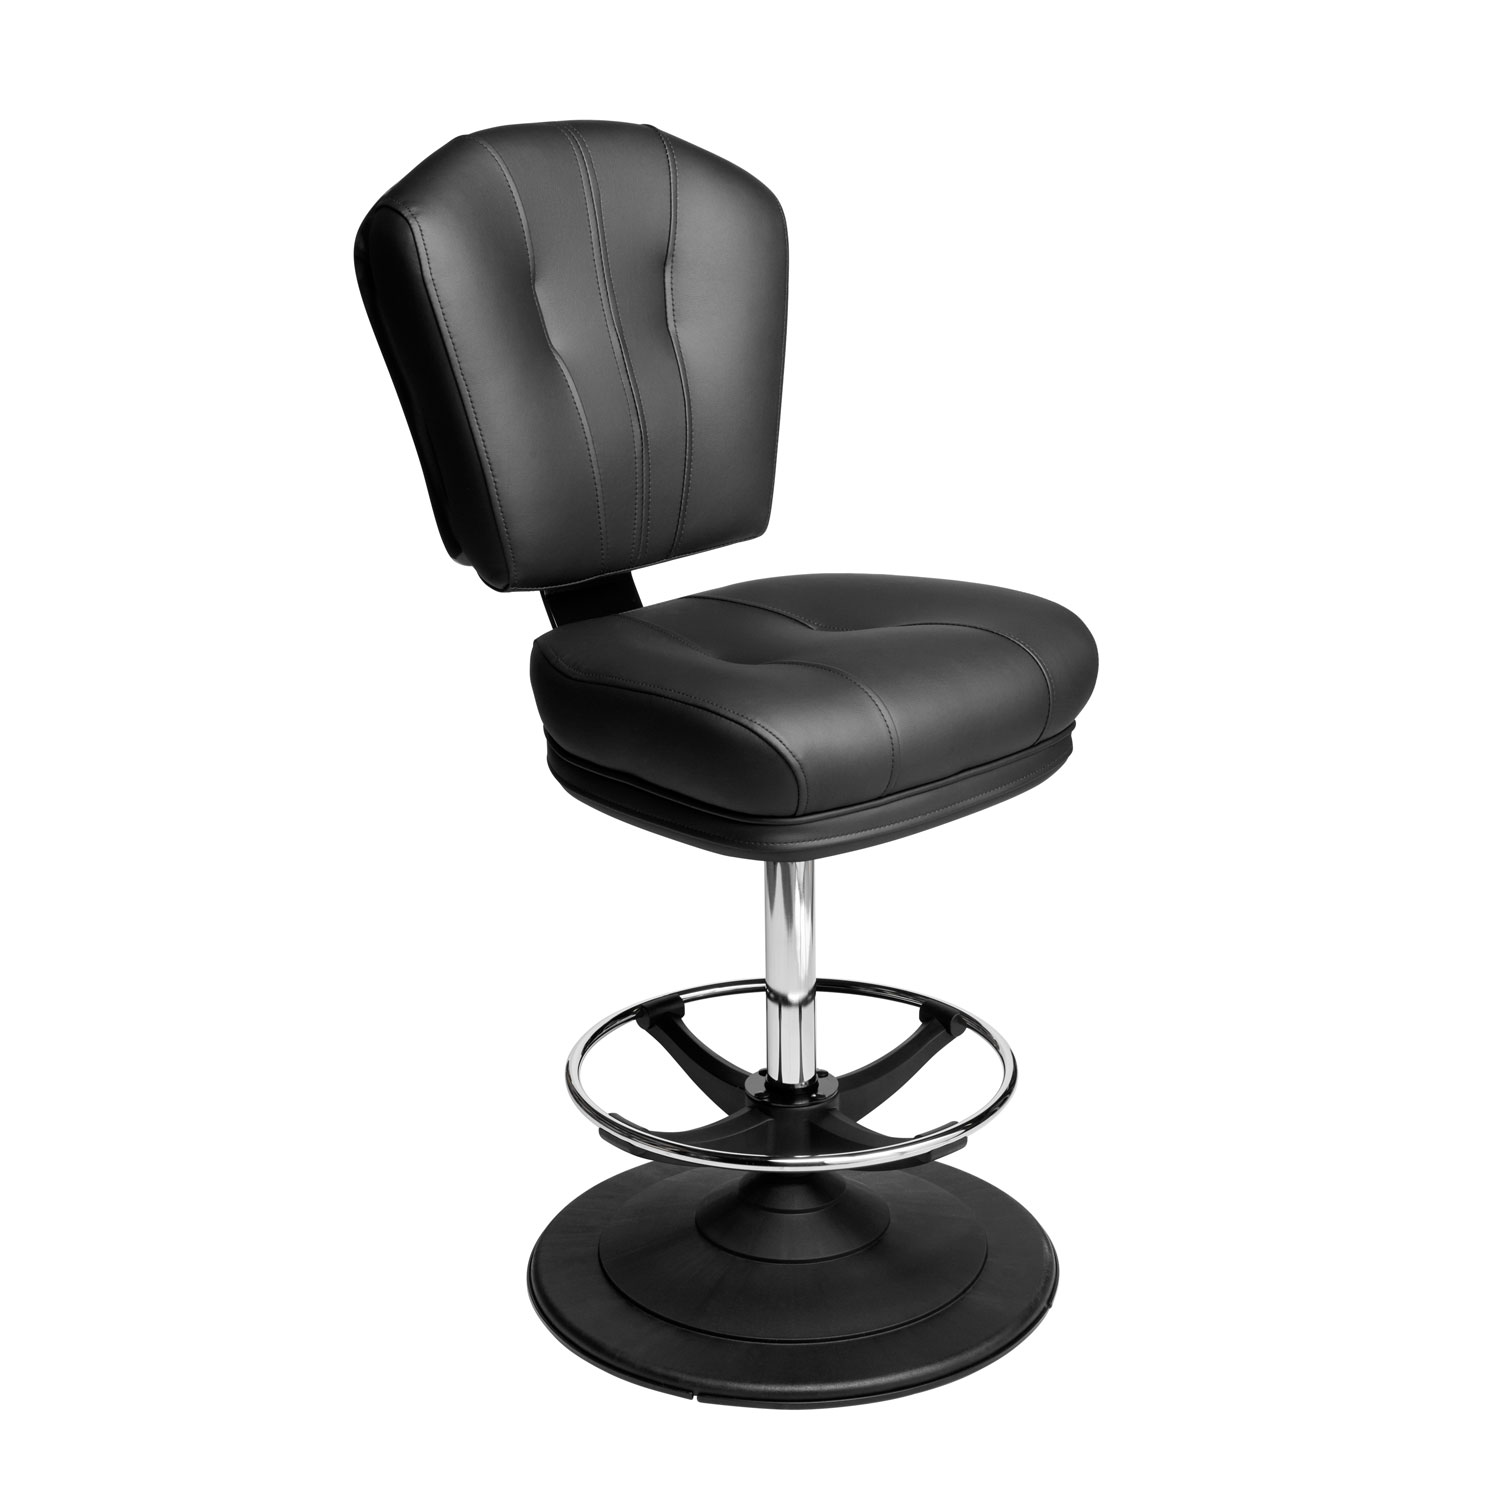 Monte carlo casino chair gaming stool with quick-release seat and ezi-glide disc base and chrome centre-column